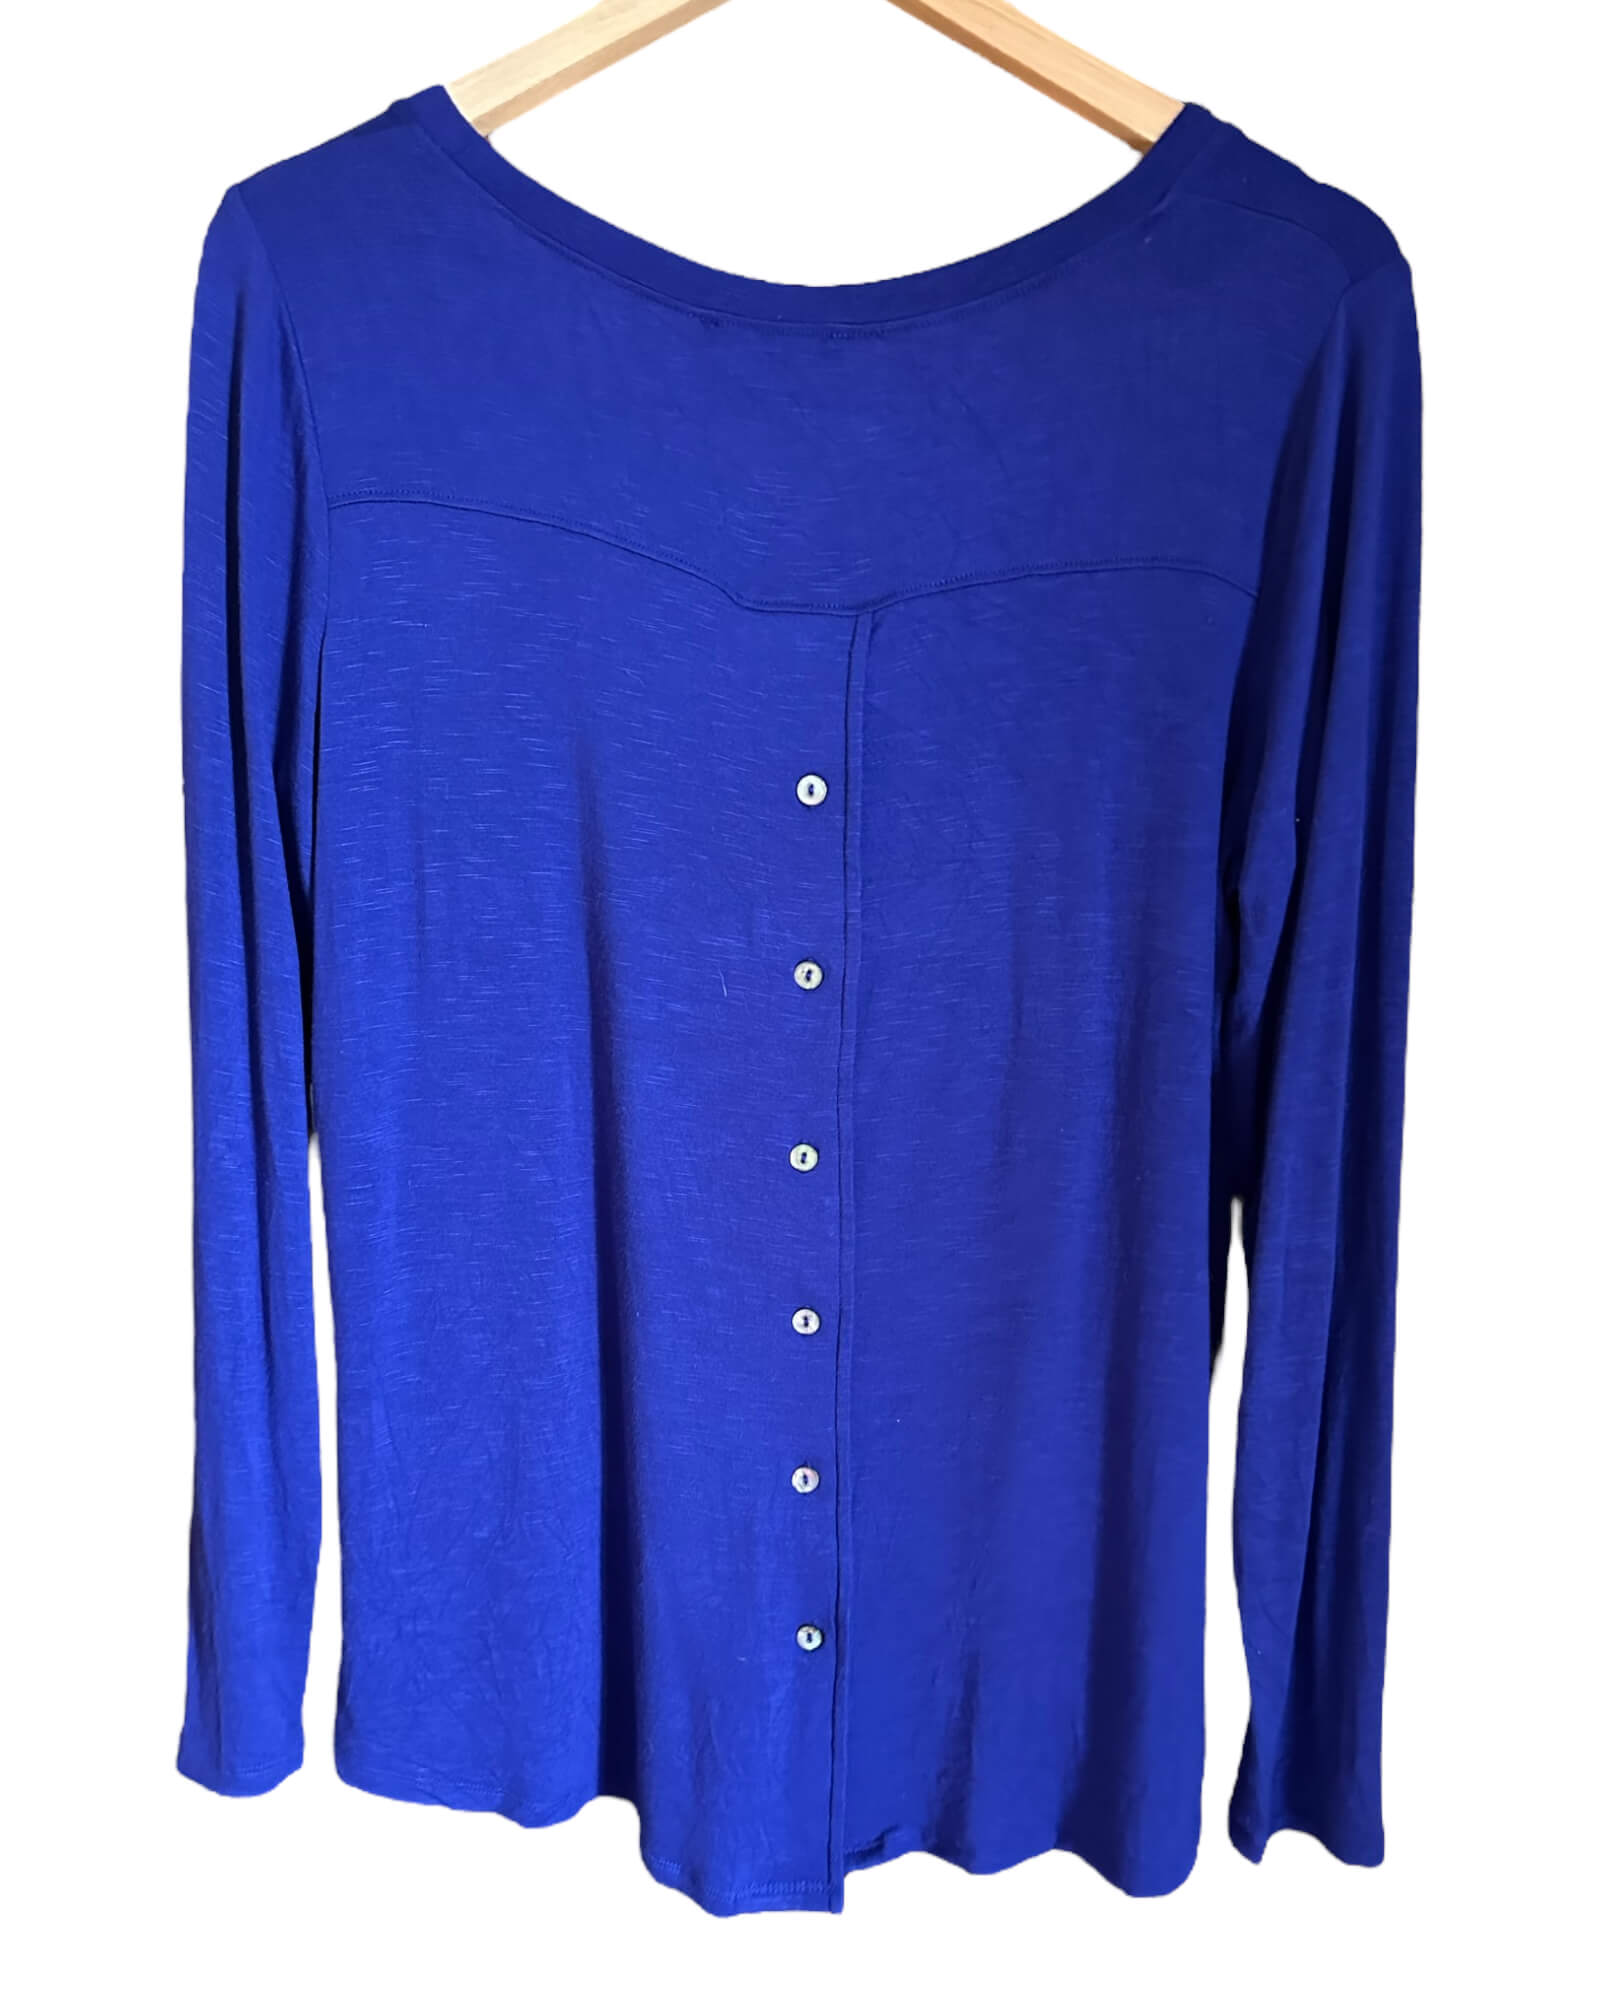 Cool Winter FOR CYNTHIA indigo blue button back scoop neck swing top